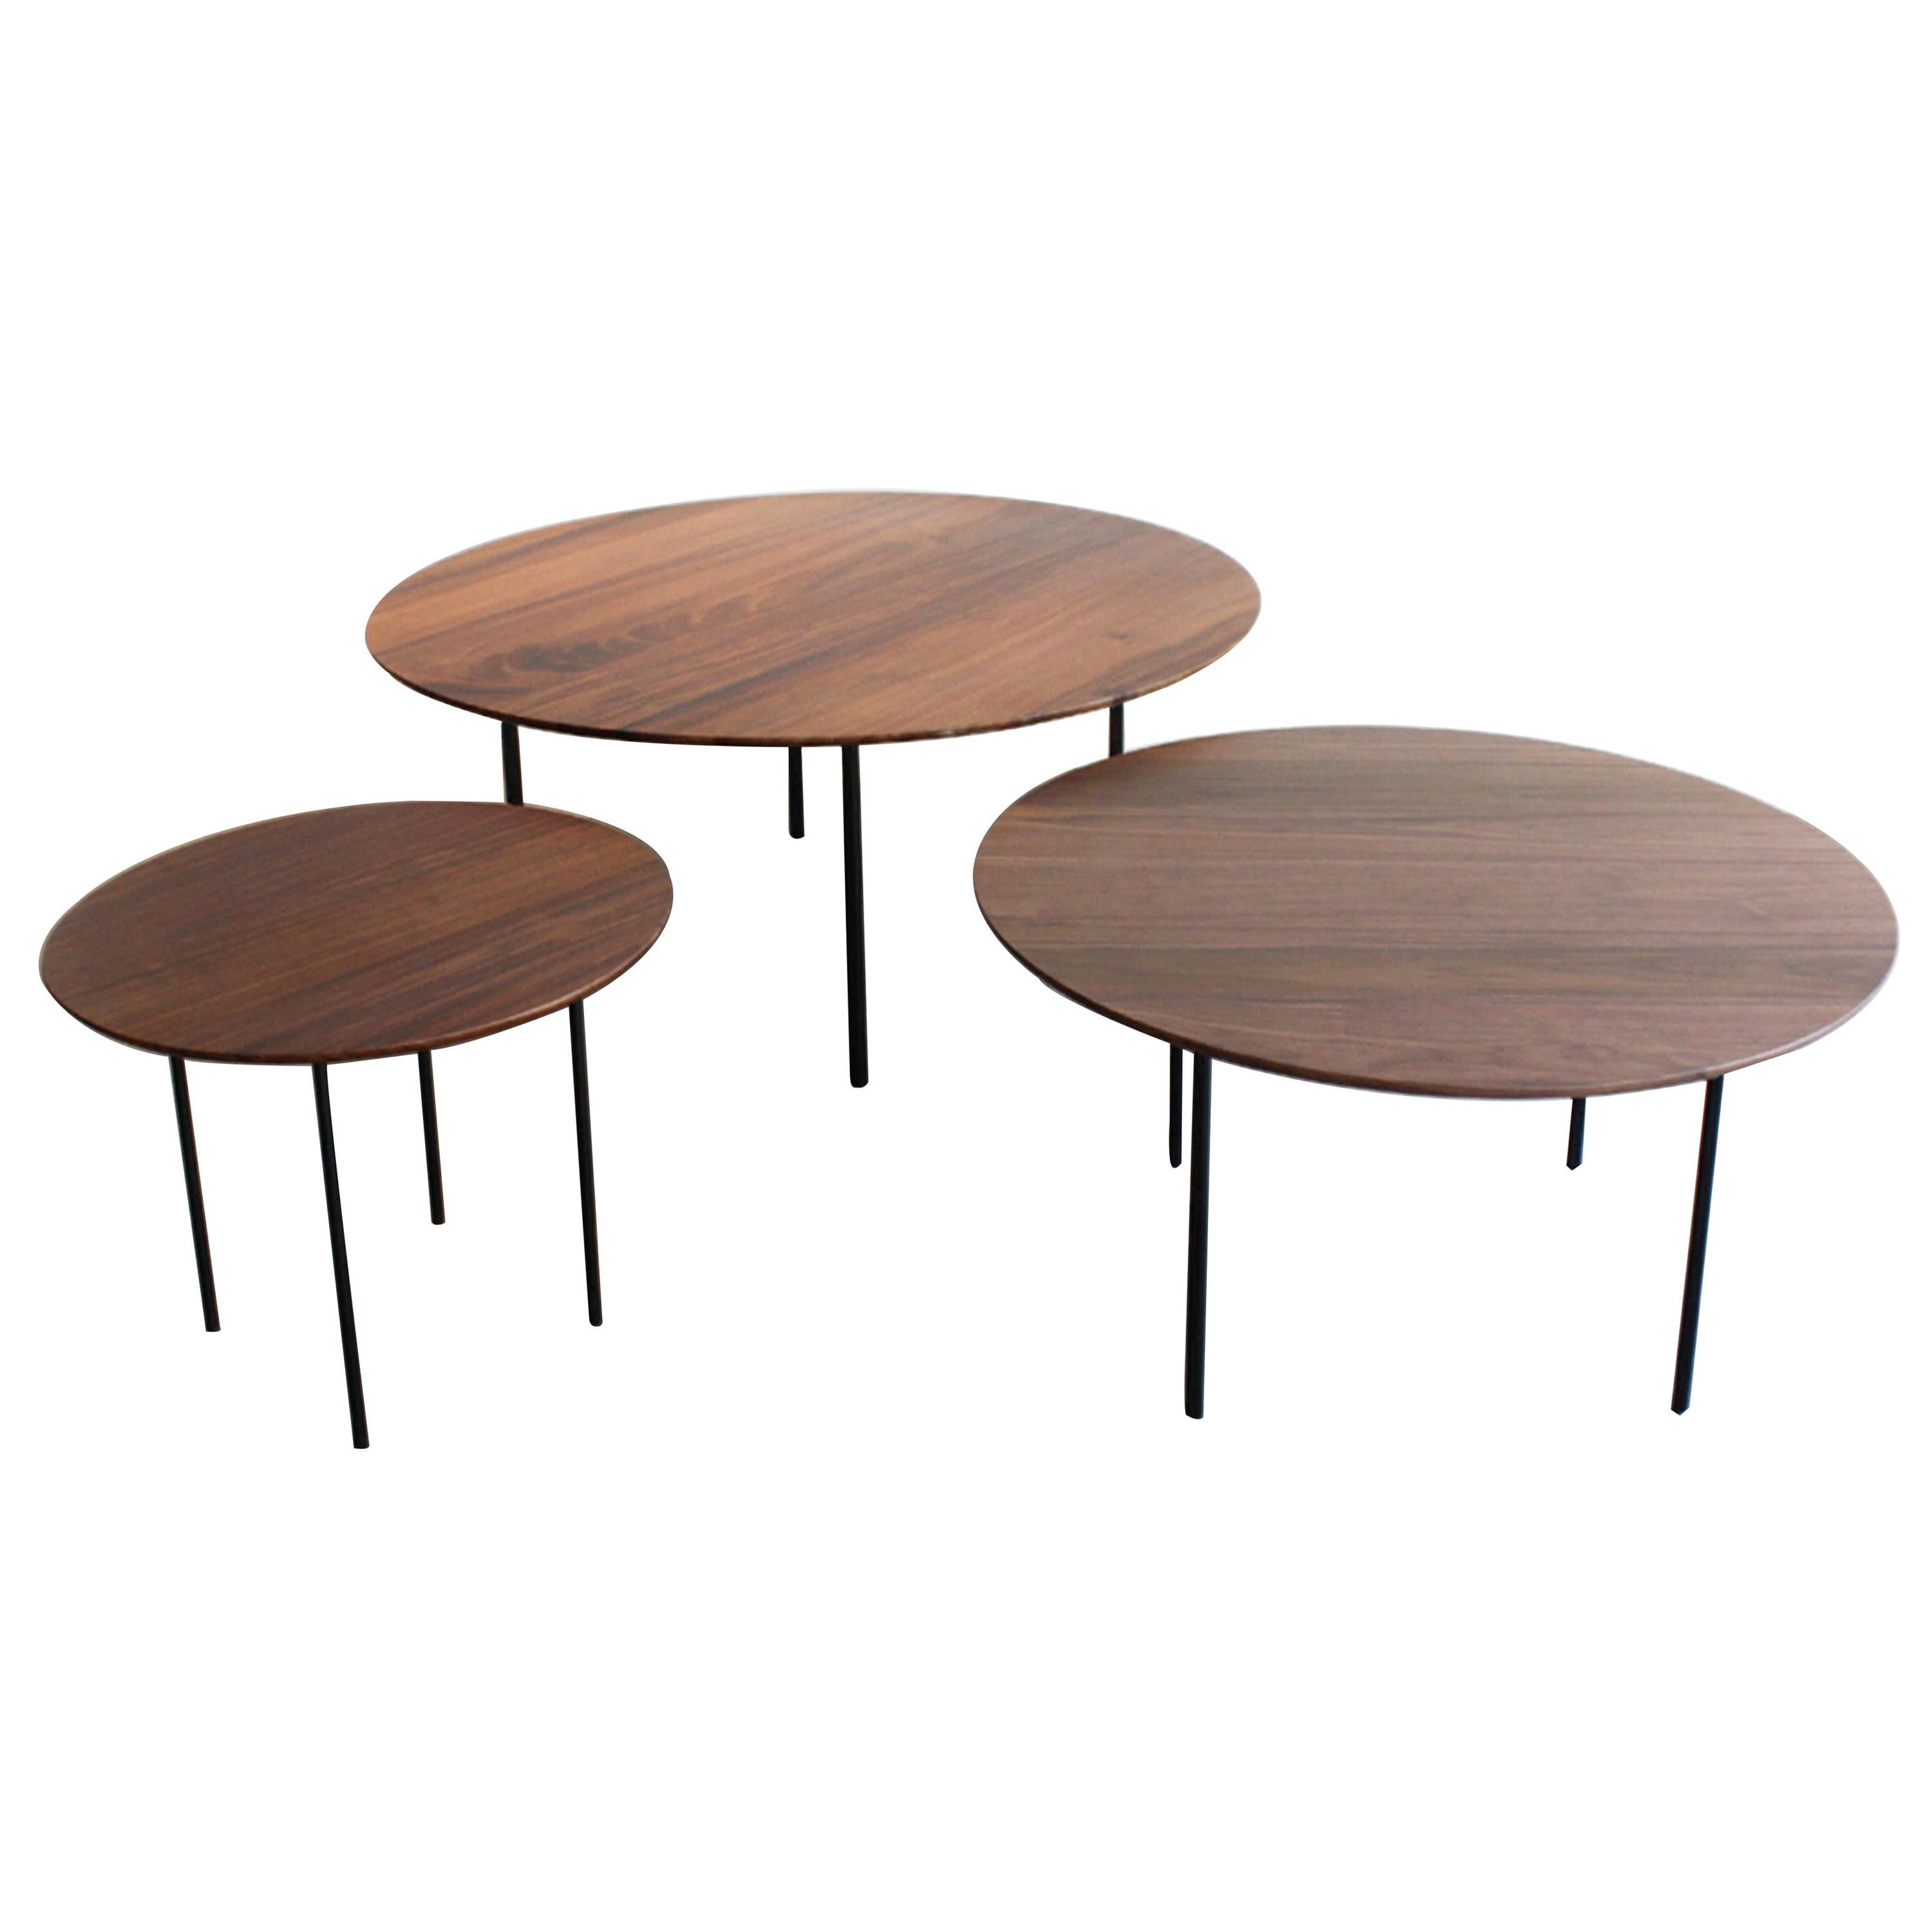 Set of Las Plato Short Tables, Maria Beckmann, Represented by Tuleste Factory